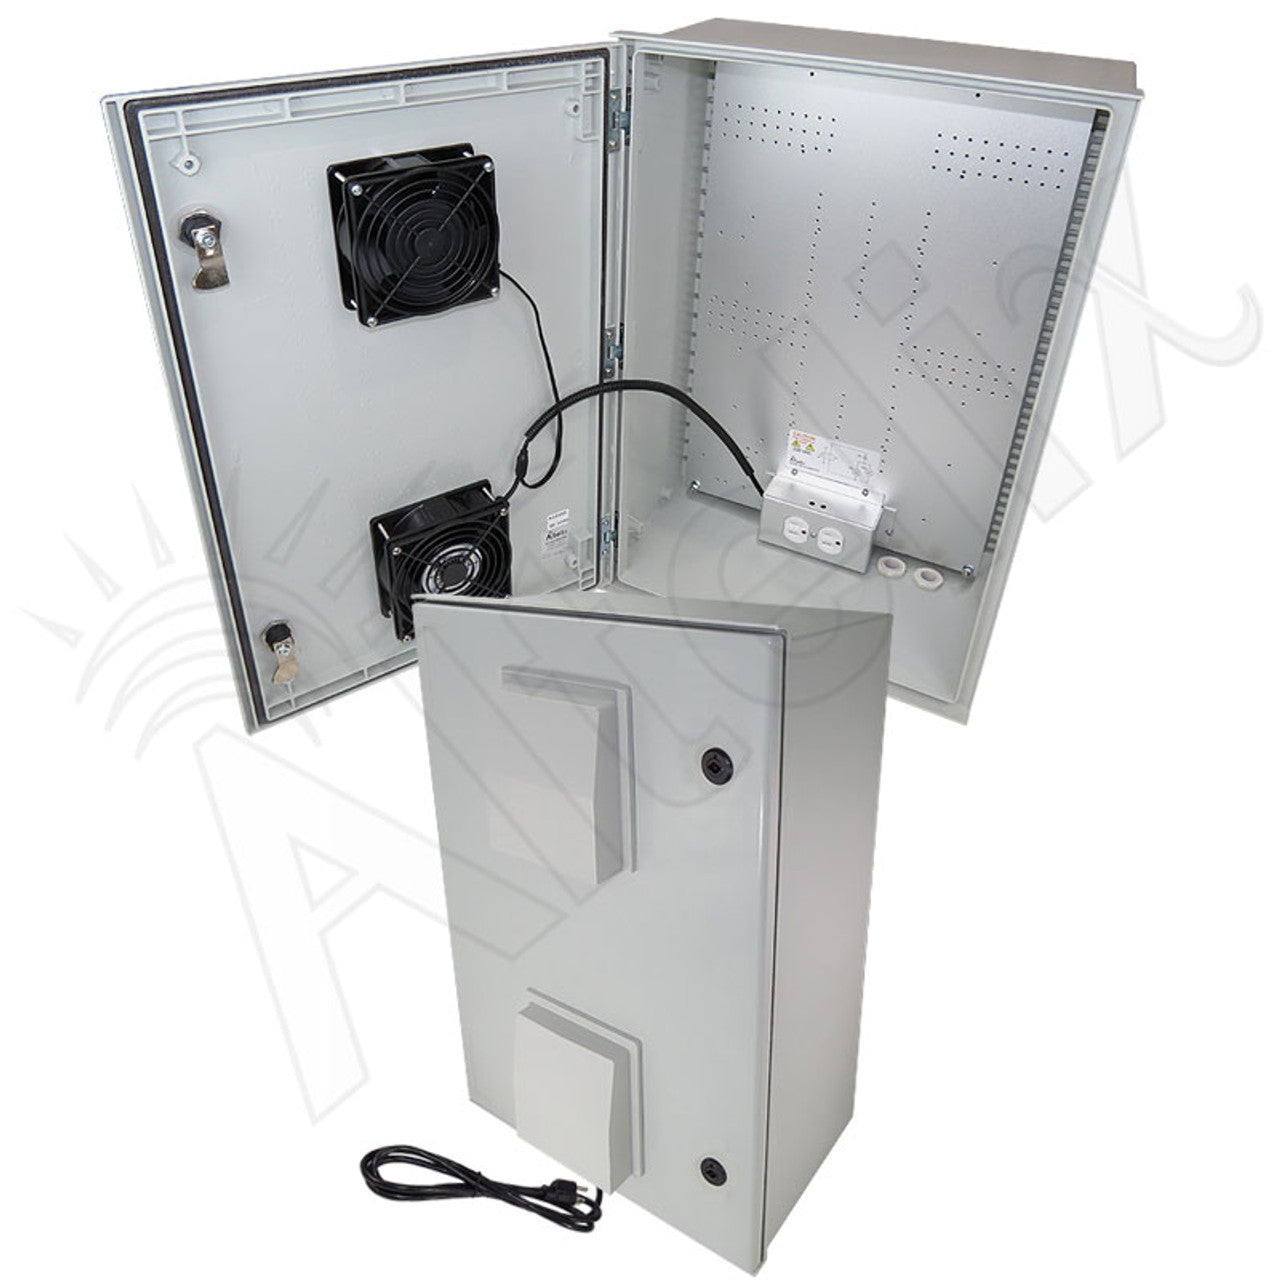 Altelix Vented Fiberglass Weatherproof NEMA Enclosure with 120 VAC Outlets, Power Cord, 200W Heater and 85°F Turn-On Cooling Fan